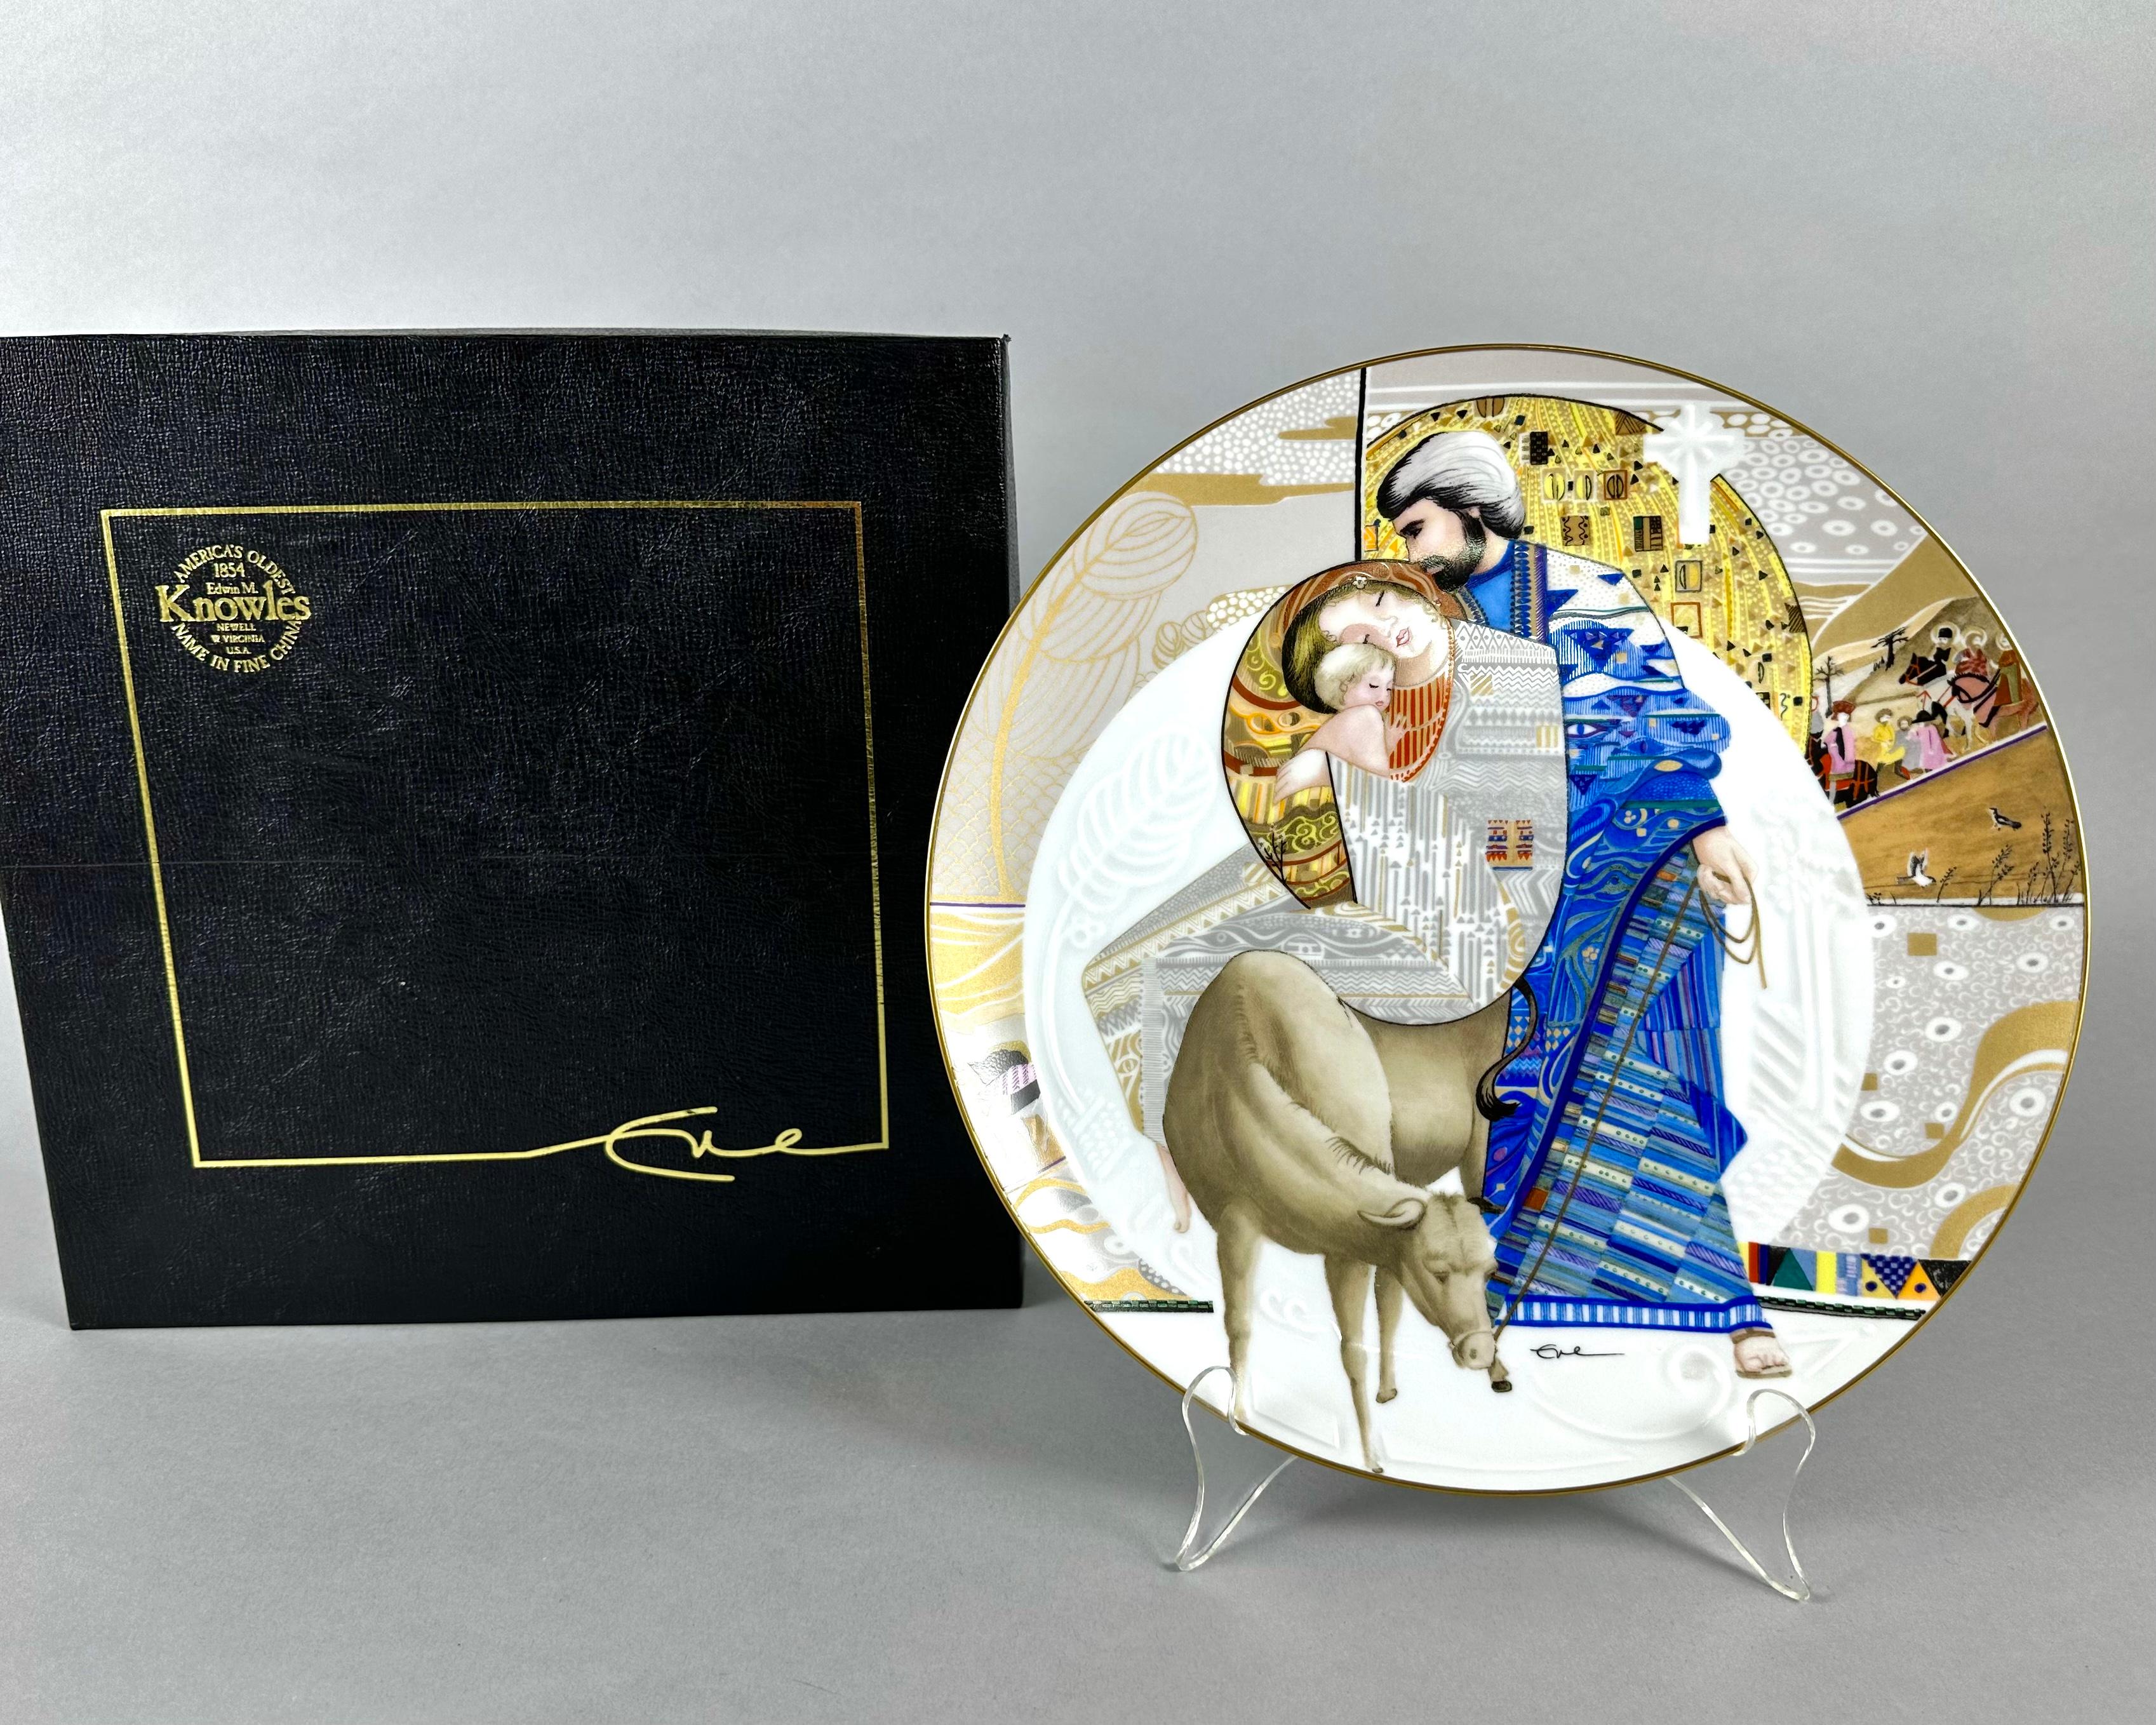 A collection of Edwin M. Knowles fine china collector numbered plates from The Biblical Mothers Series by the artist Eve Licea.

Made in the original Licea Style technique, combining voluminous texture and gold patterns.

Certificate of Authenticity